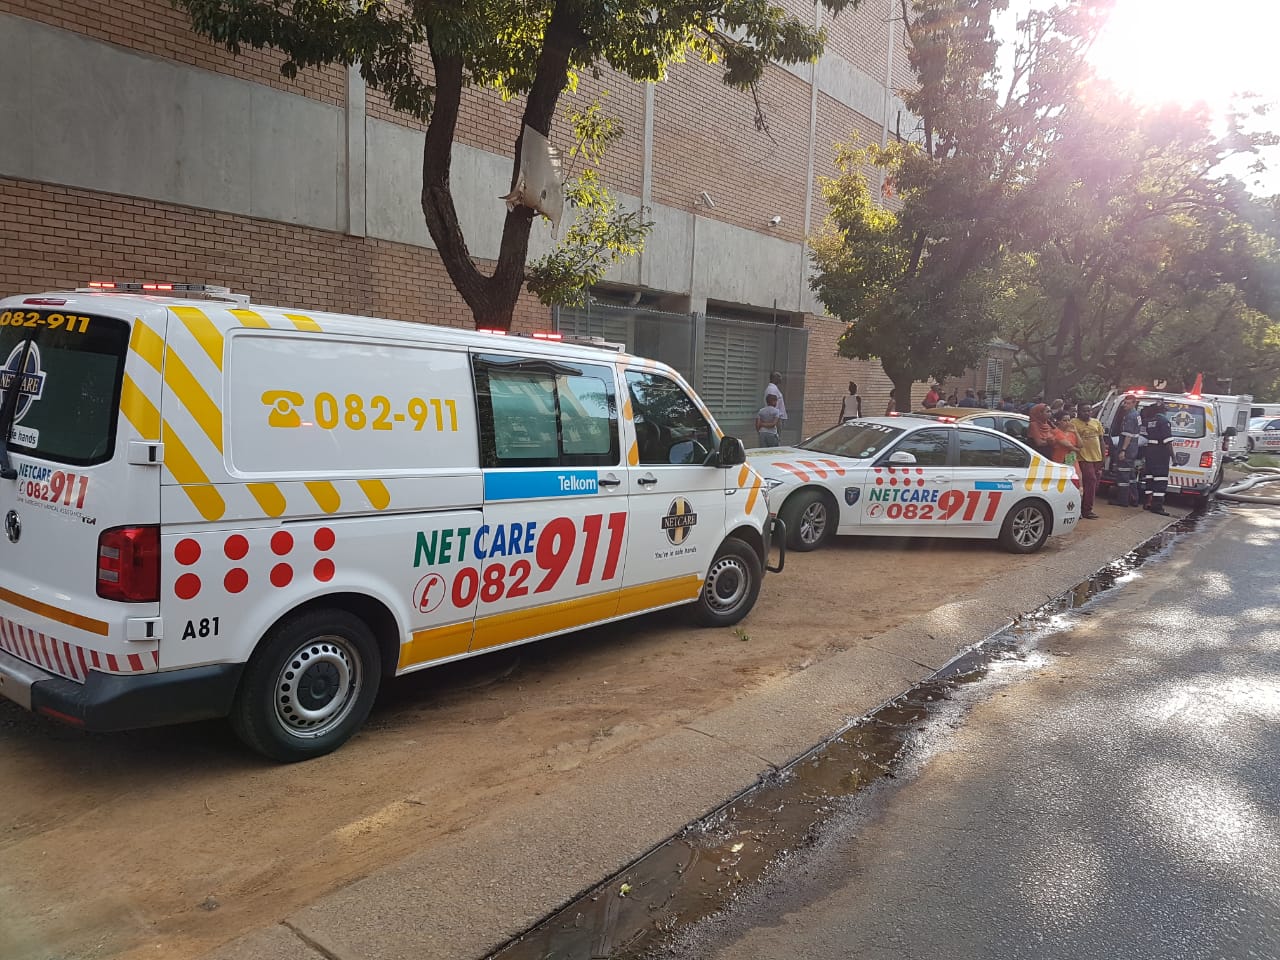 Gauteng: Woman seriously injured in building fire.